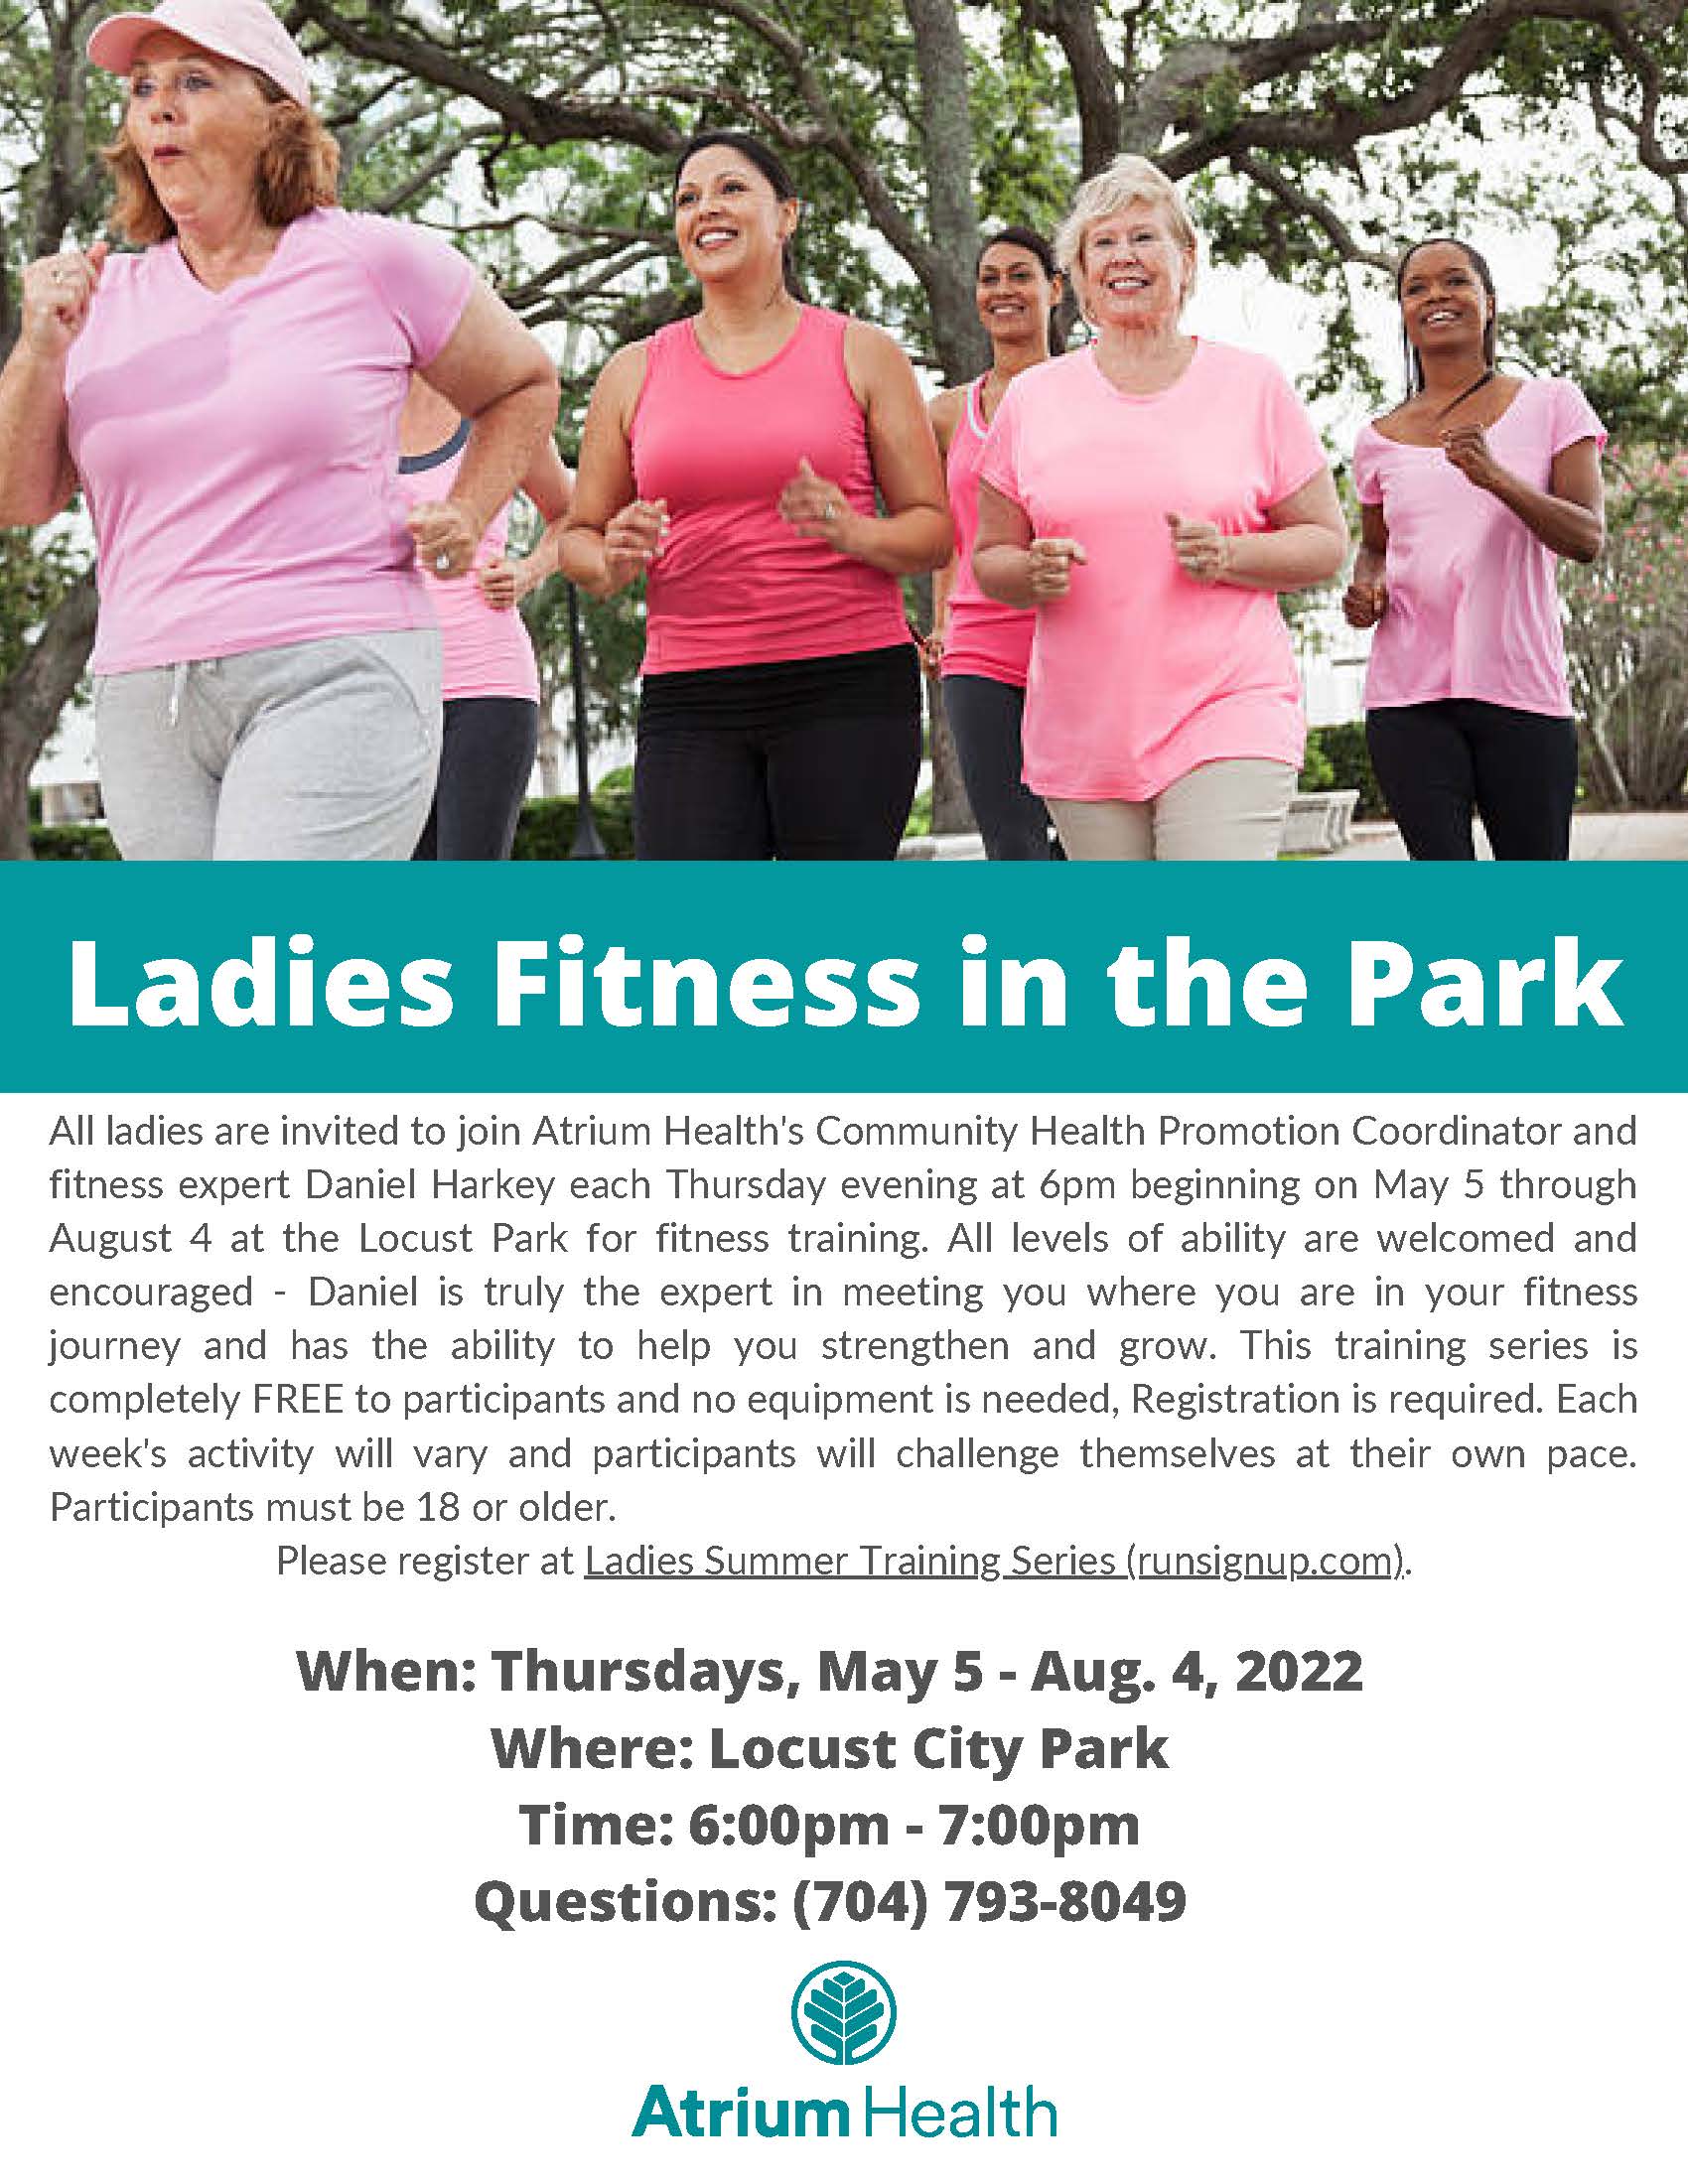 Ladies Fitness in the Park Flyer